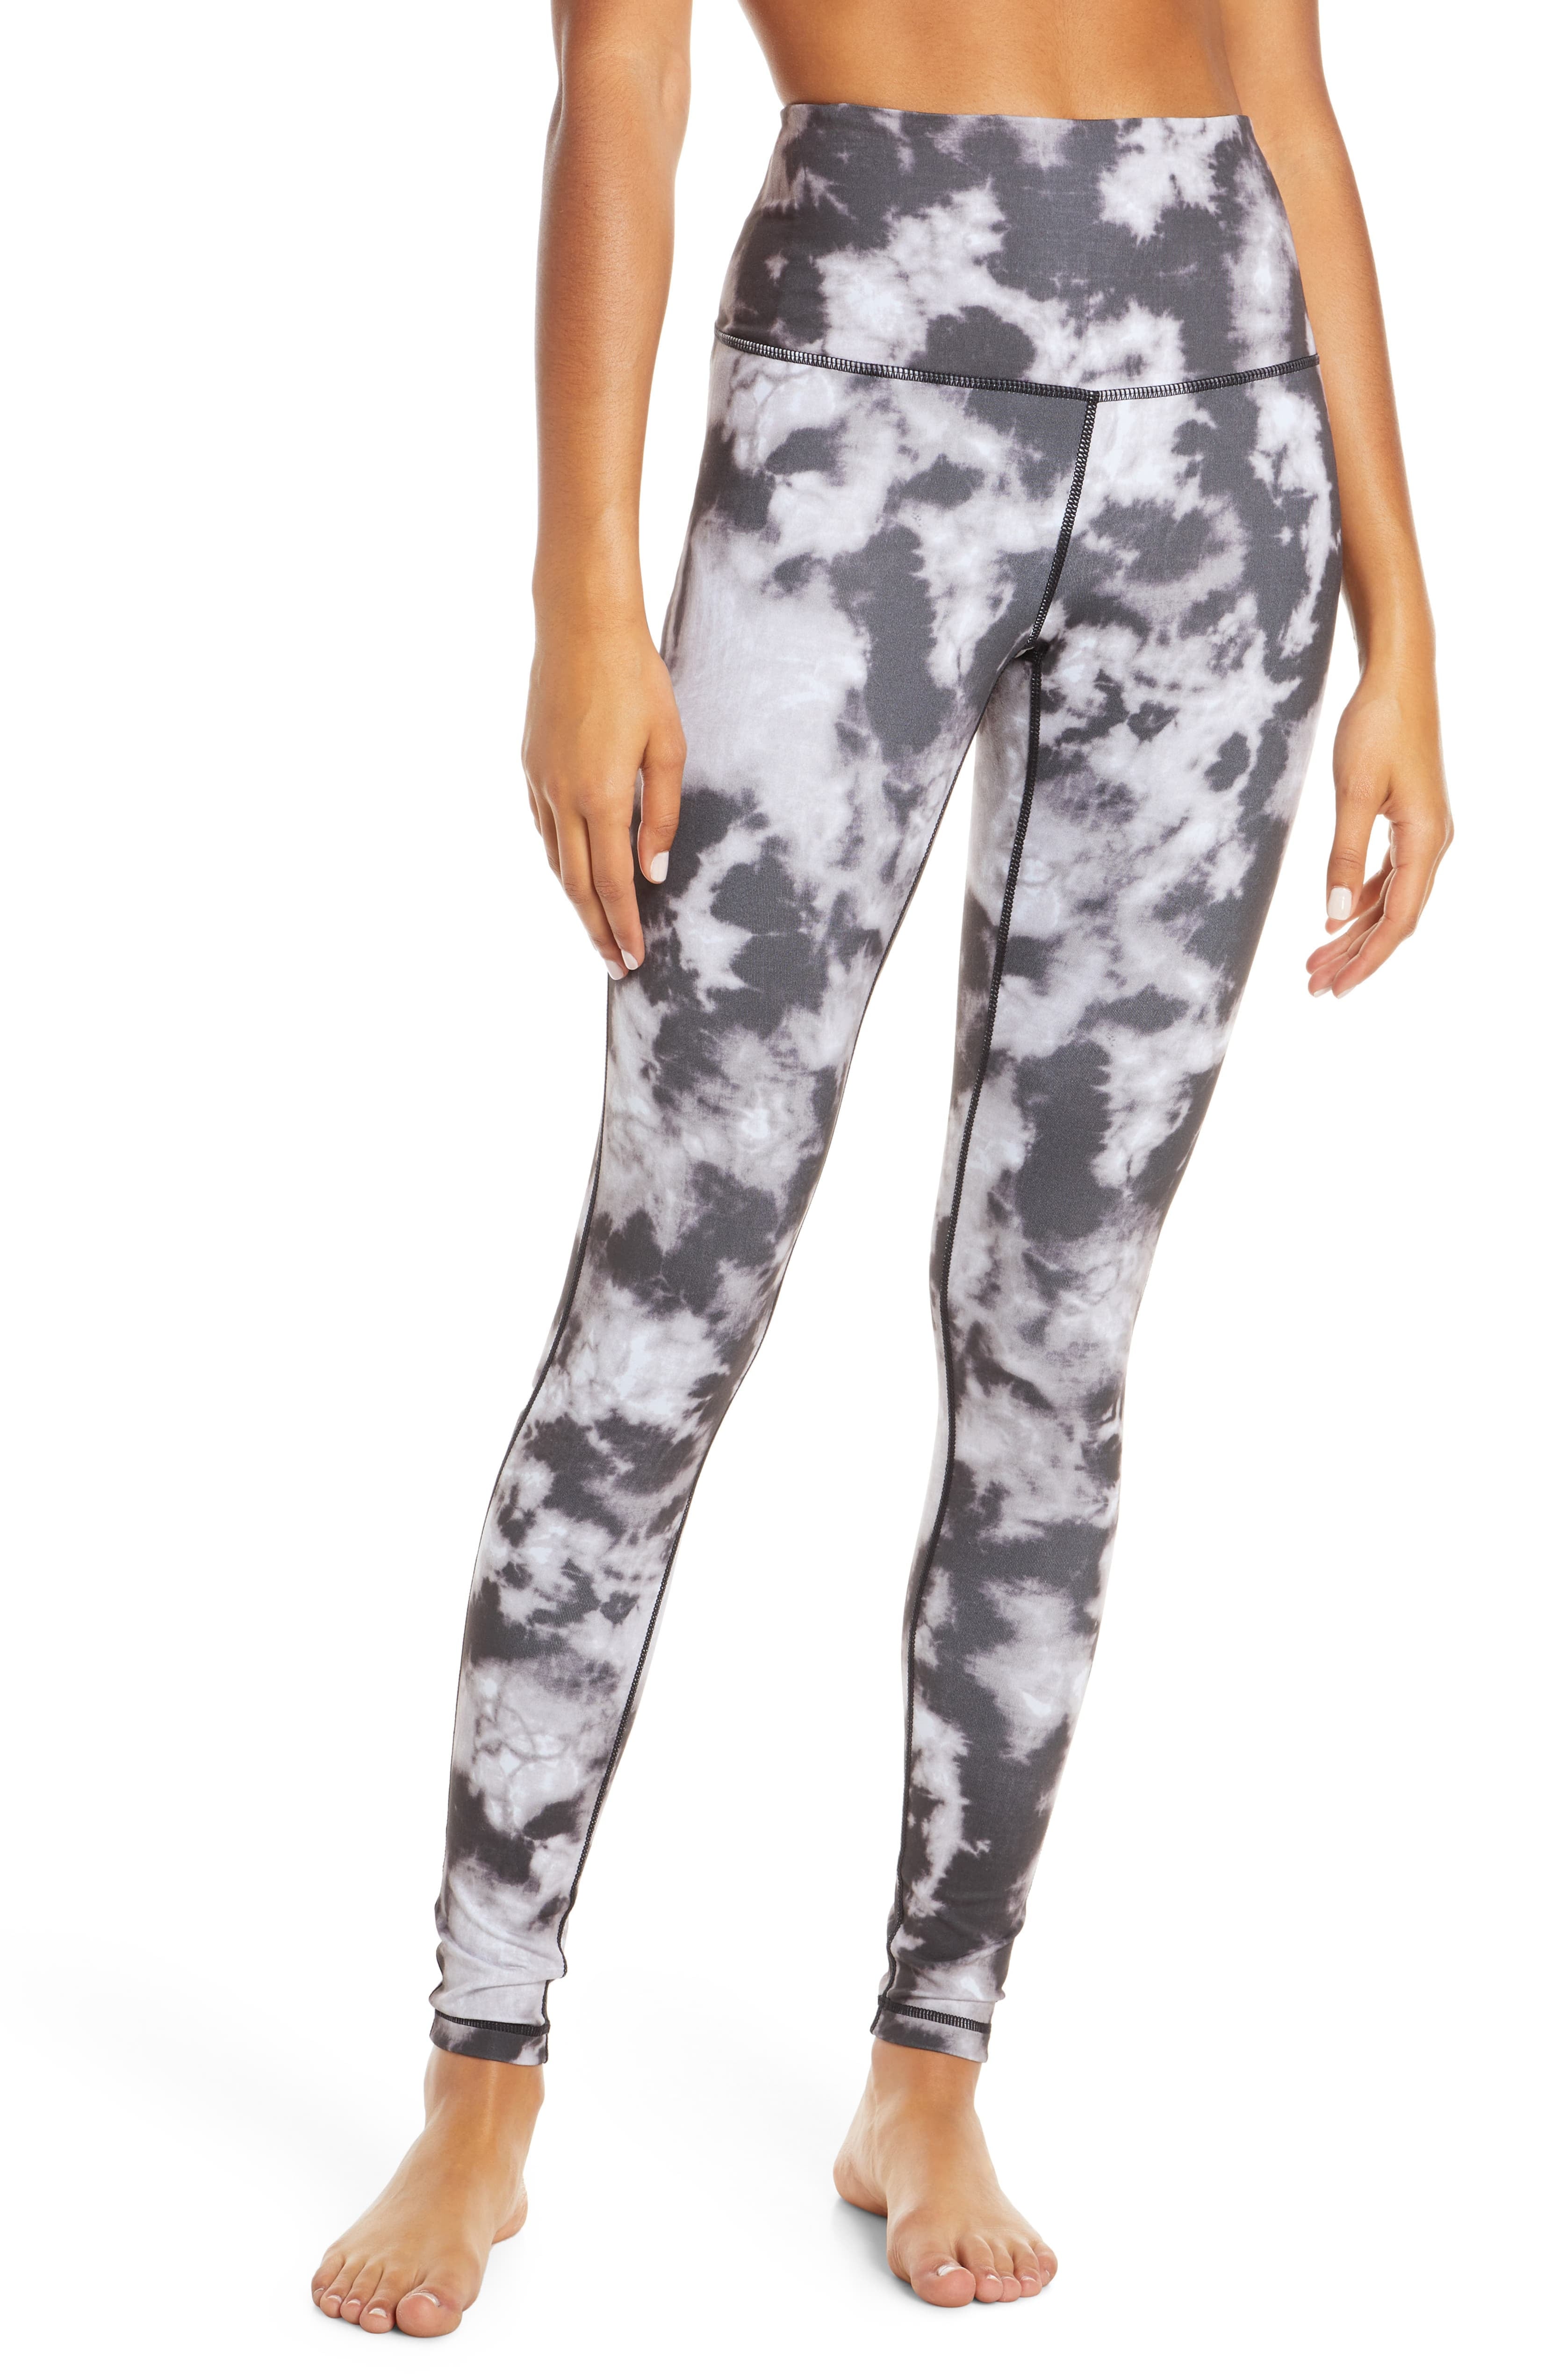 Zella Leggings Size XS - $12 - From Rayna